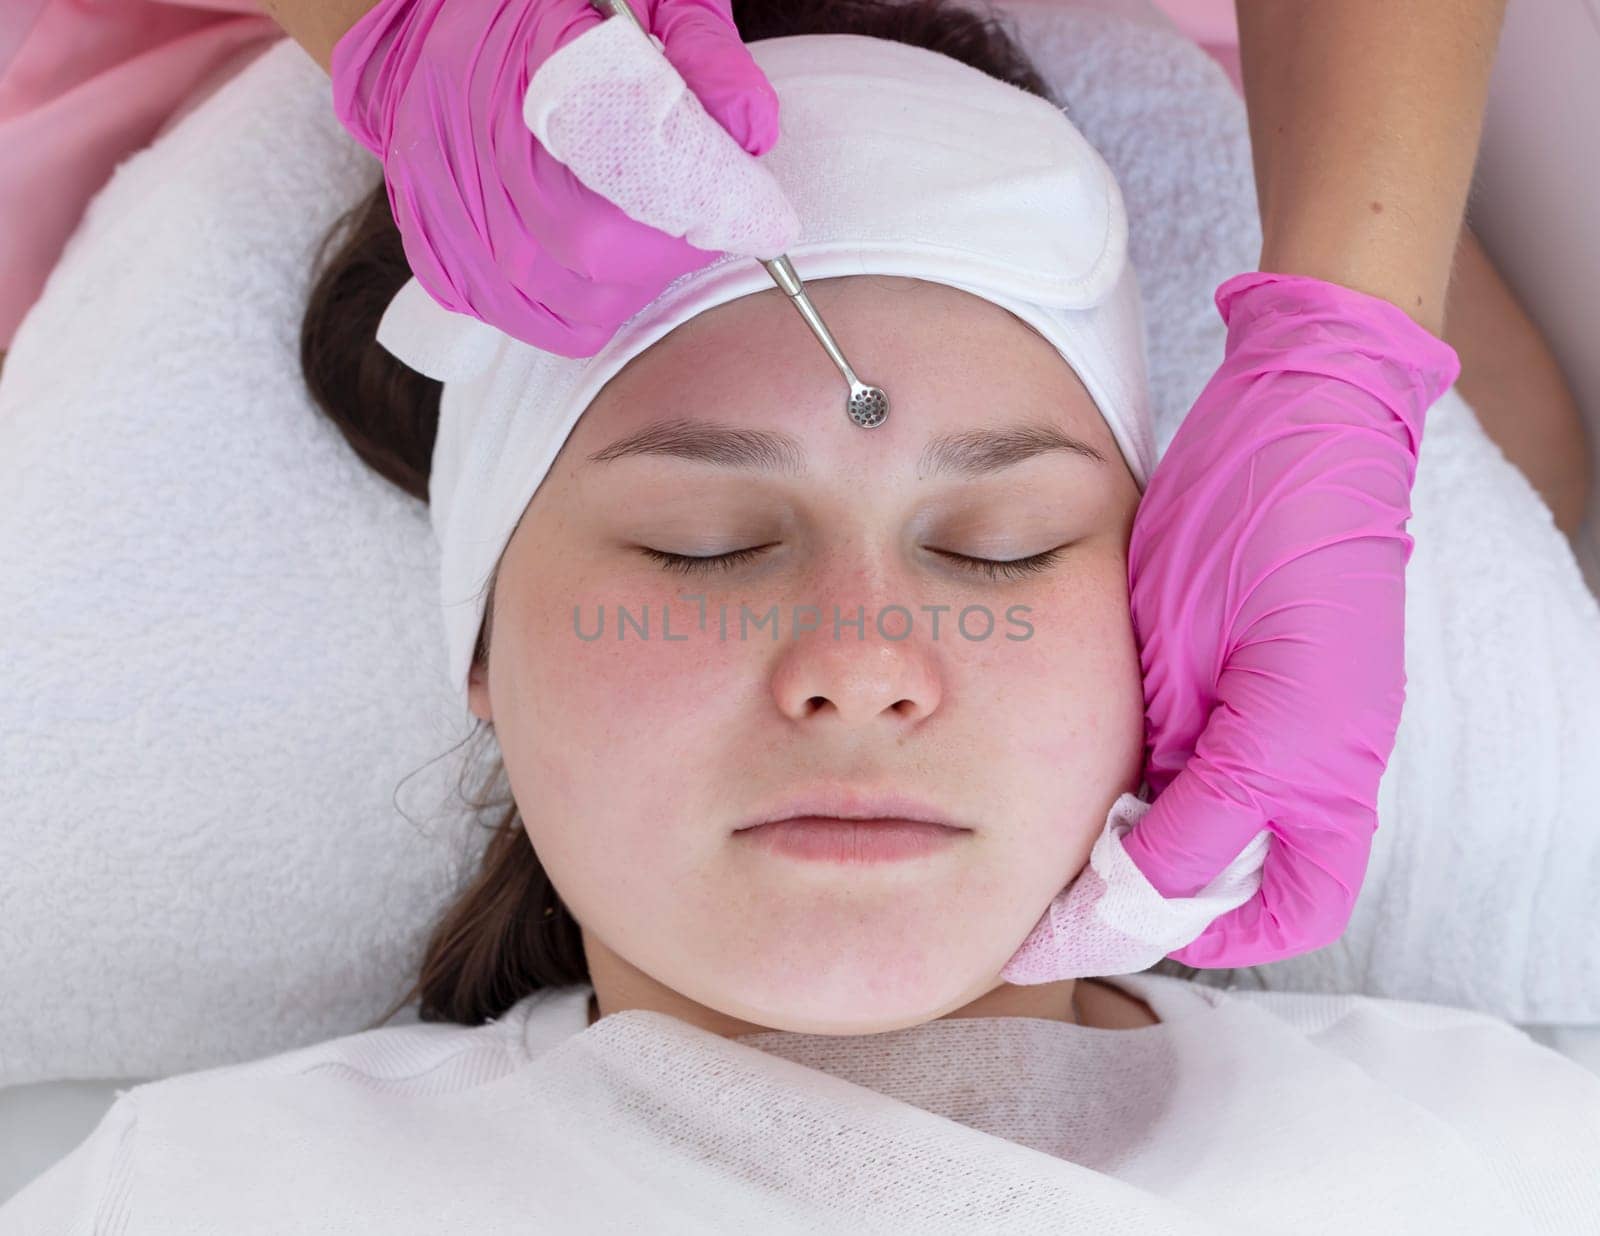 Mechanical Cleansing of Face Skin With Spoon Uno, Removing Grease and Blackheads. Young Plus Size Woman Getting Professional Skin Peeling, Cleaning by Beautician, Aesthetician. Top View, Horizontal. by netatsi